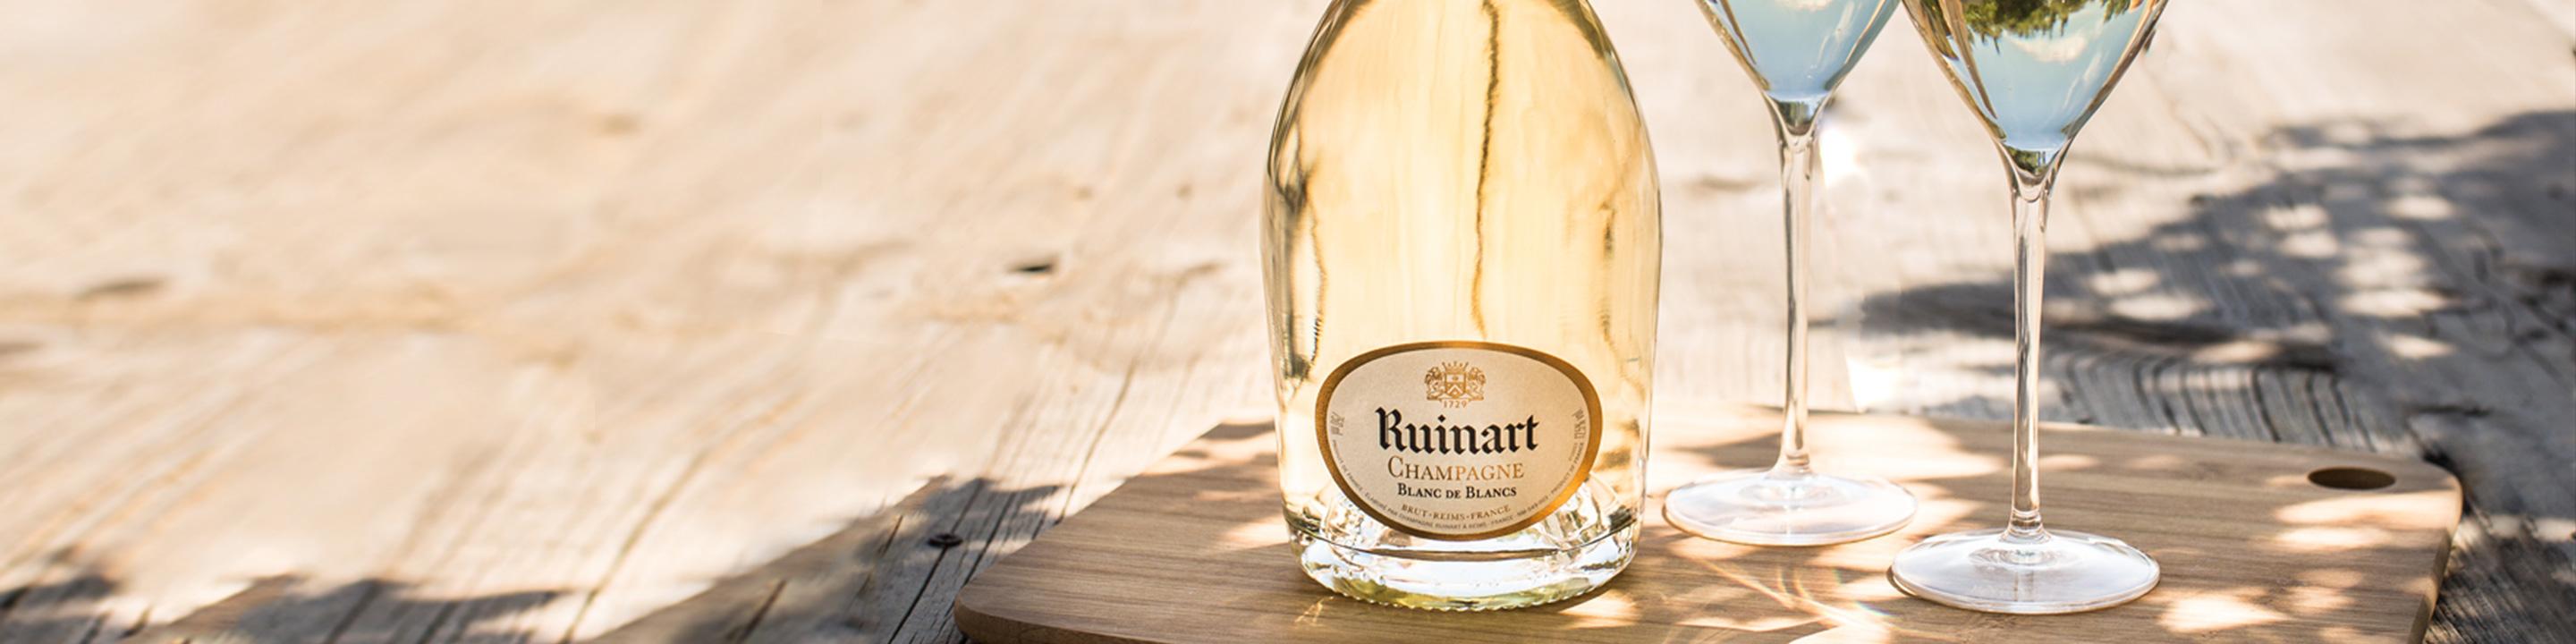 With its subtle refinement, Chardonnay is a grape variety that forms part of all Ruinart cuvees. This process has led to only twenty-three vintages being produced since the first Dom Ruinart Blanc de Blancs vintage appeared in 1959.